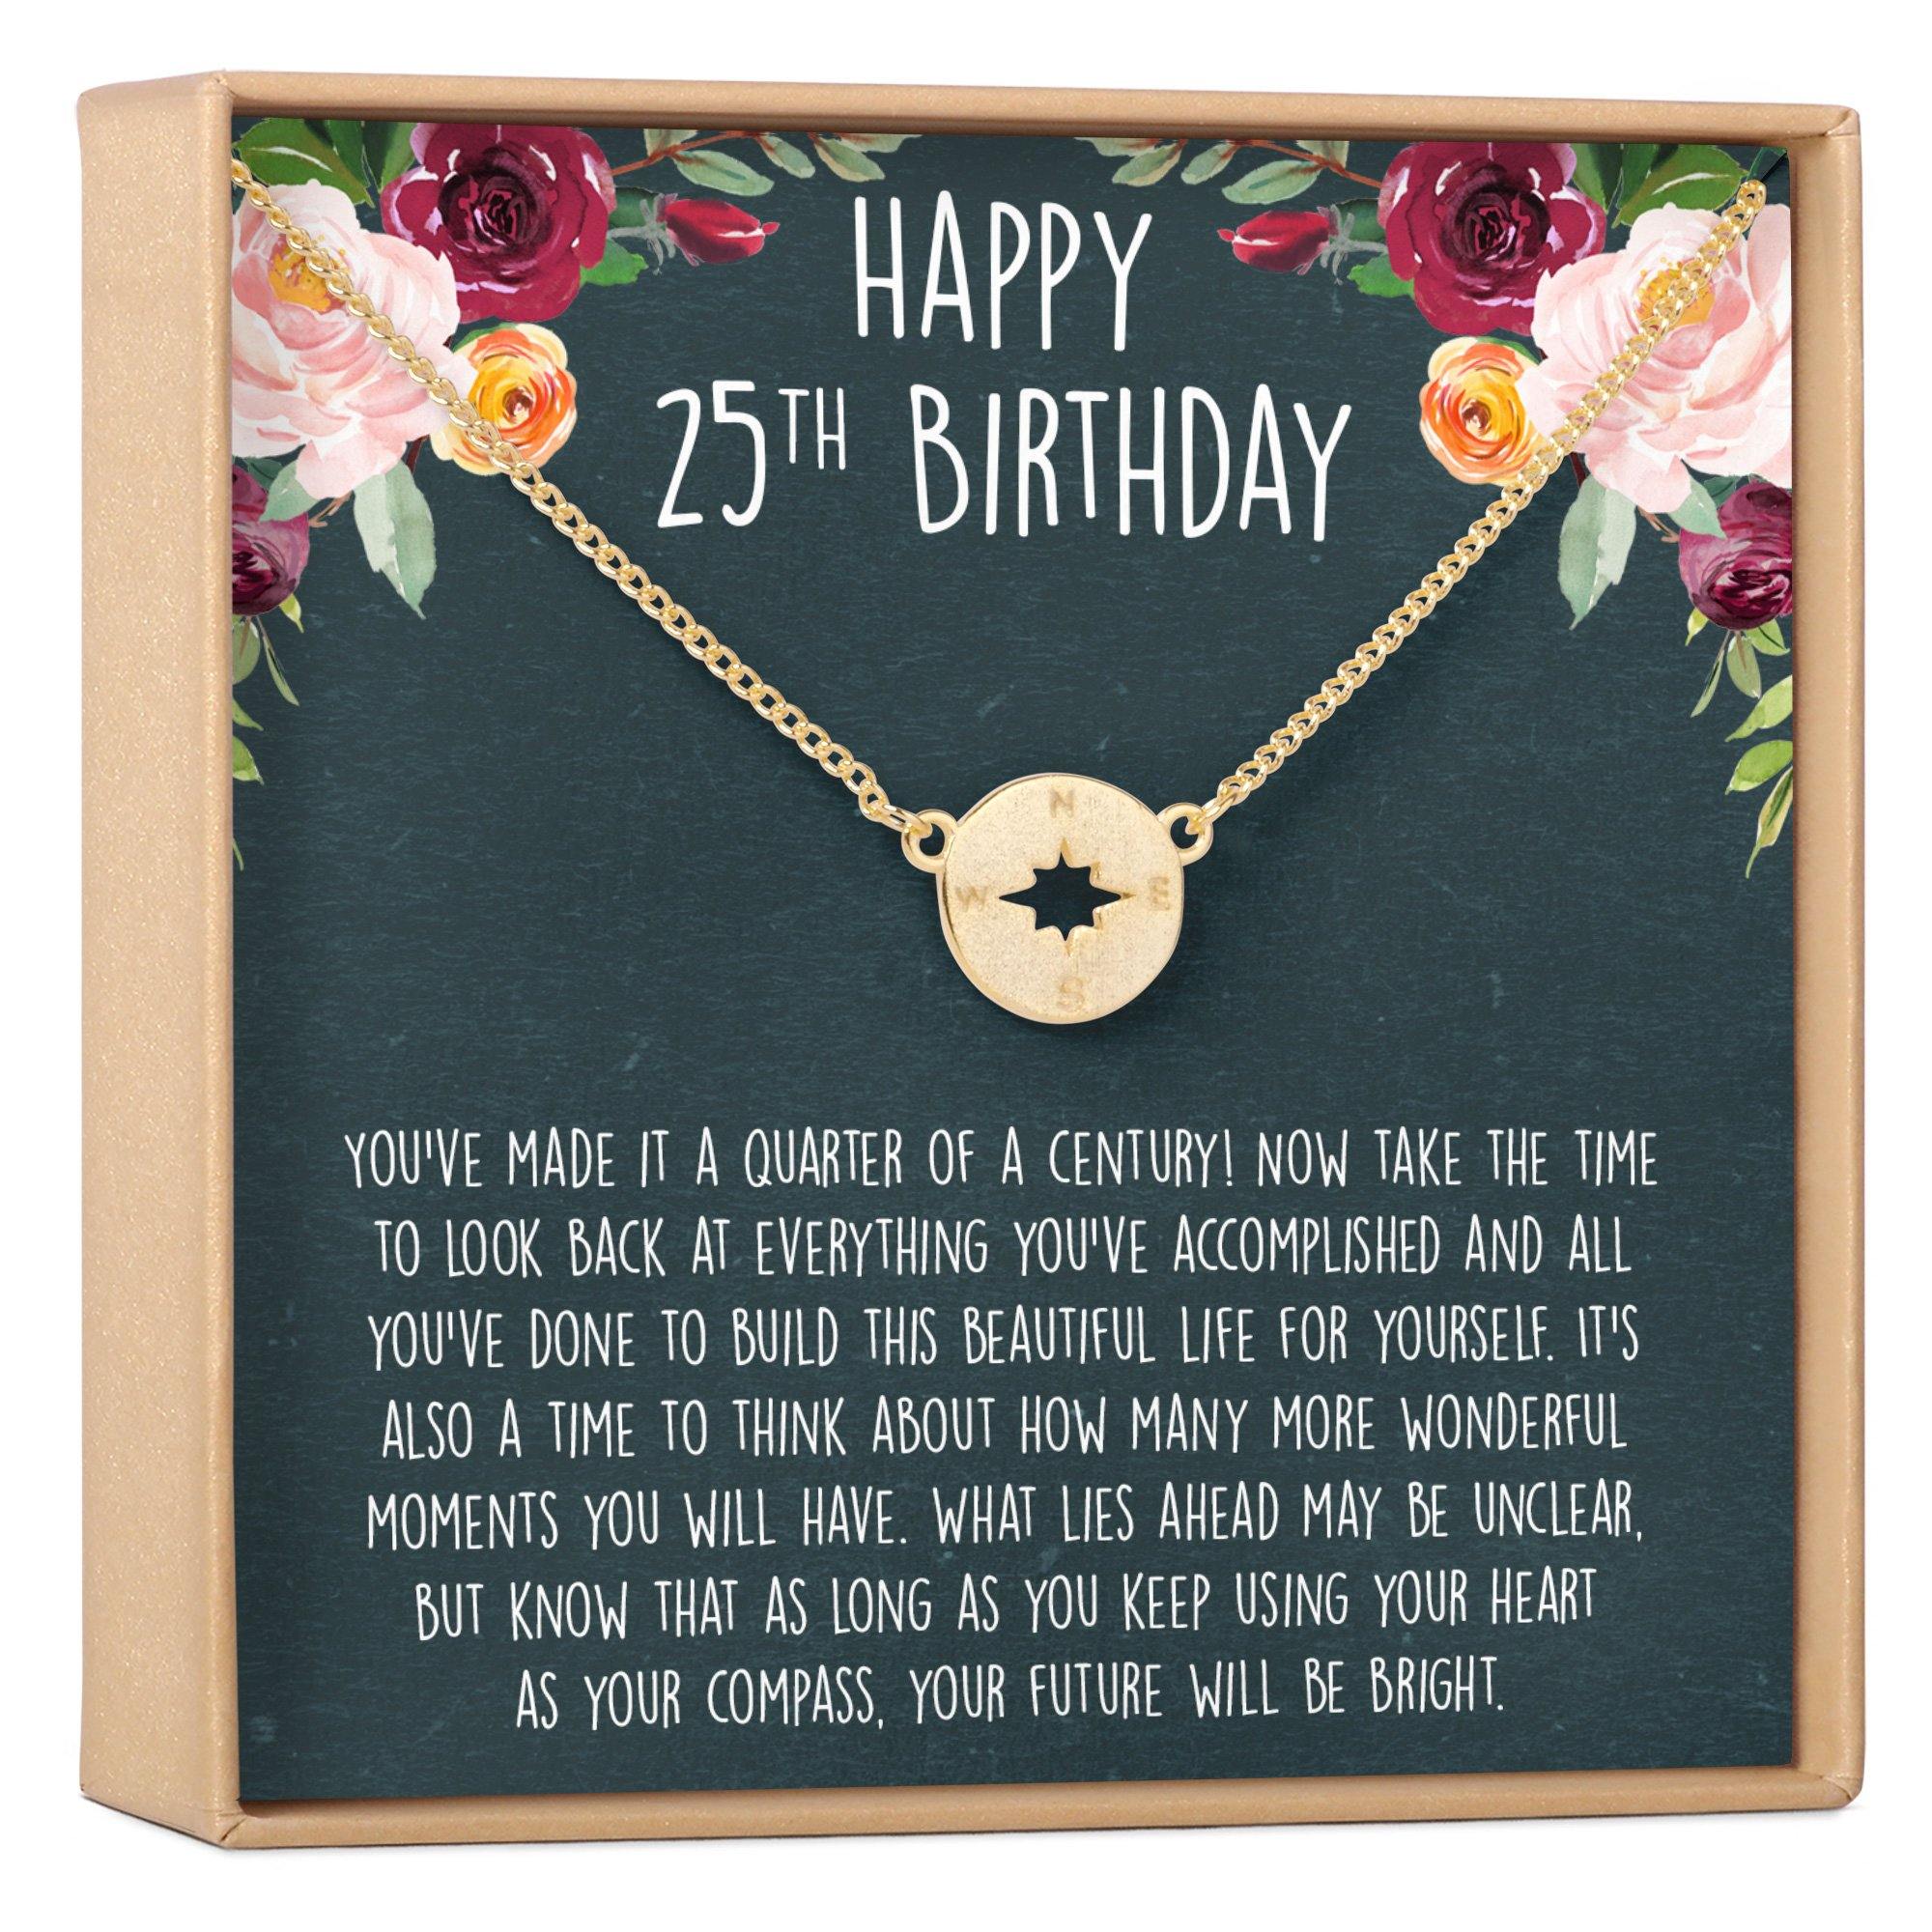 TOP 25 BEST GIFT QUOTES (of 88)